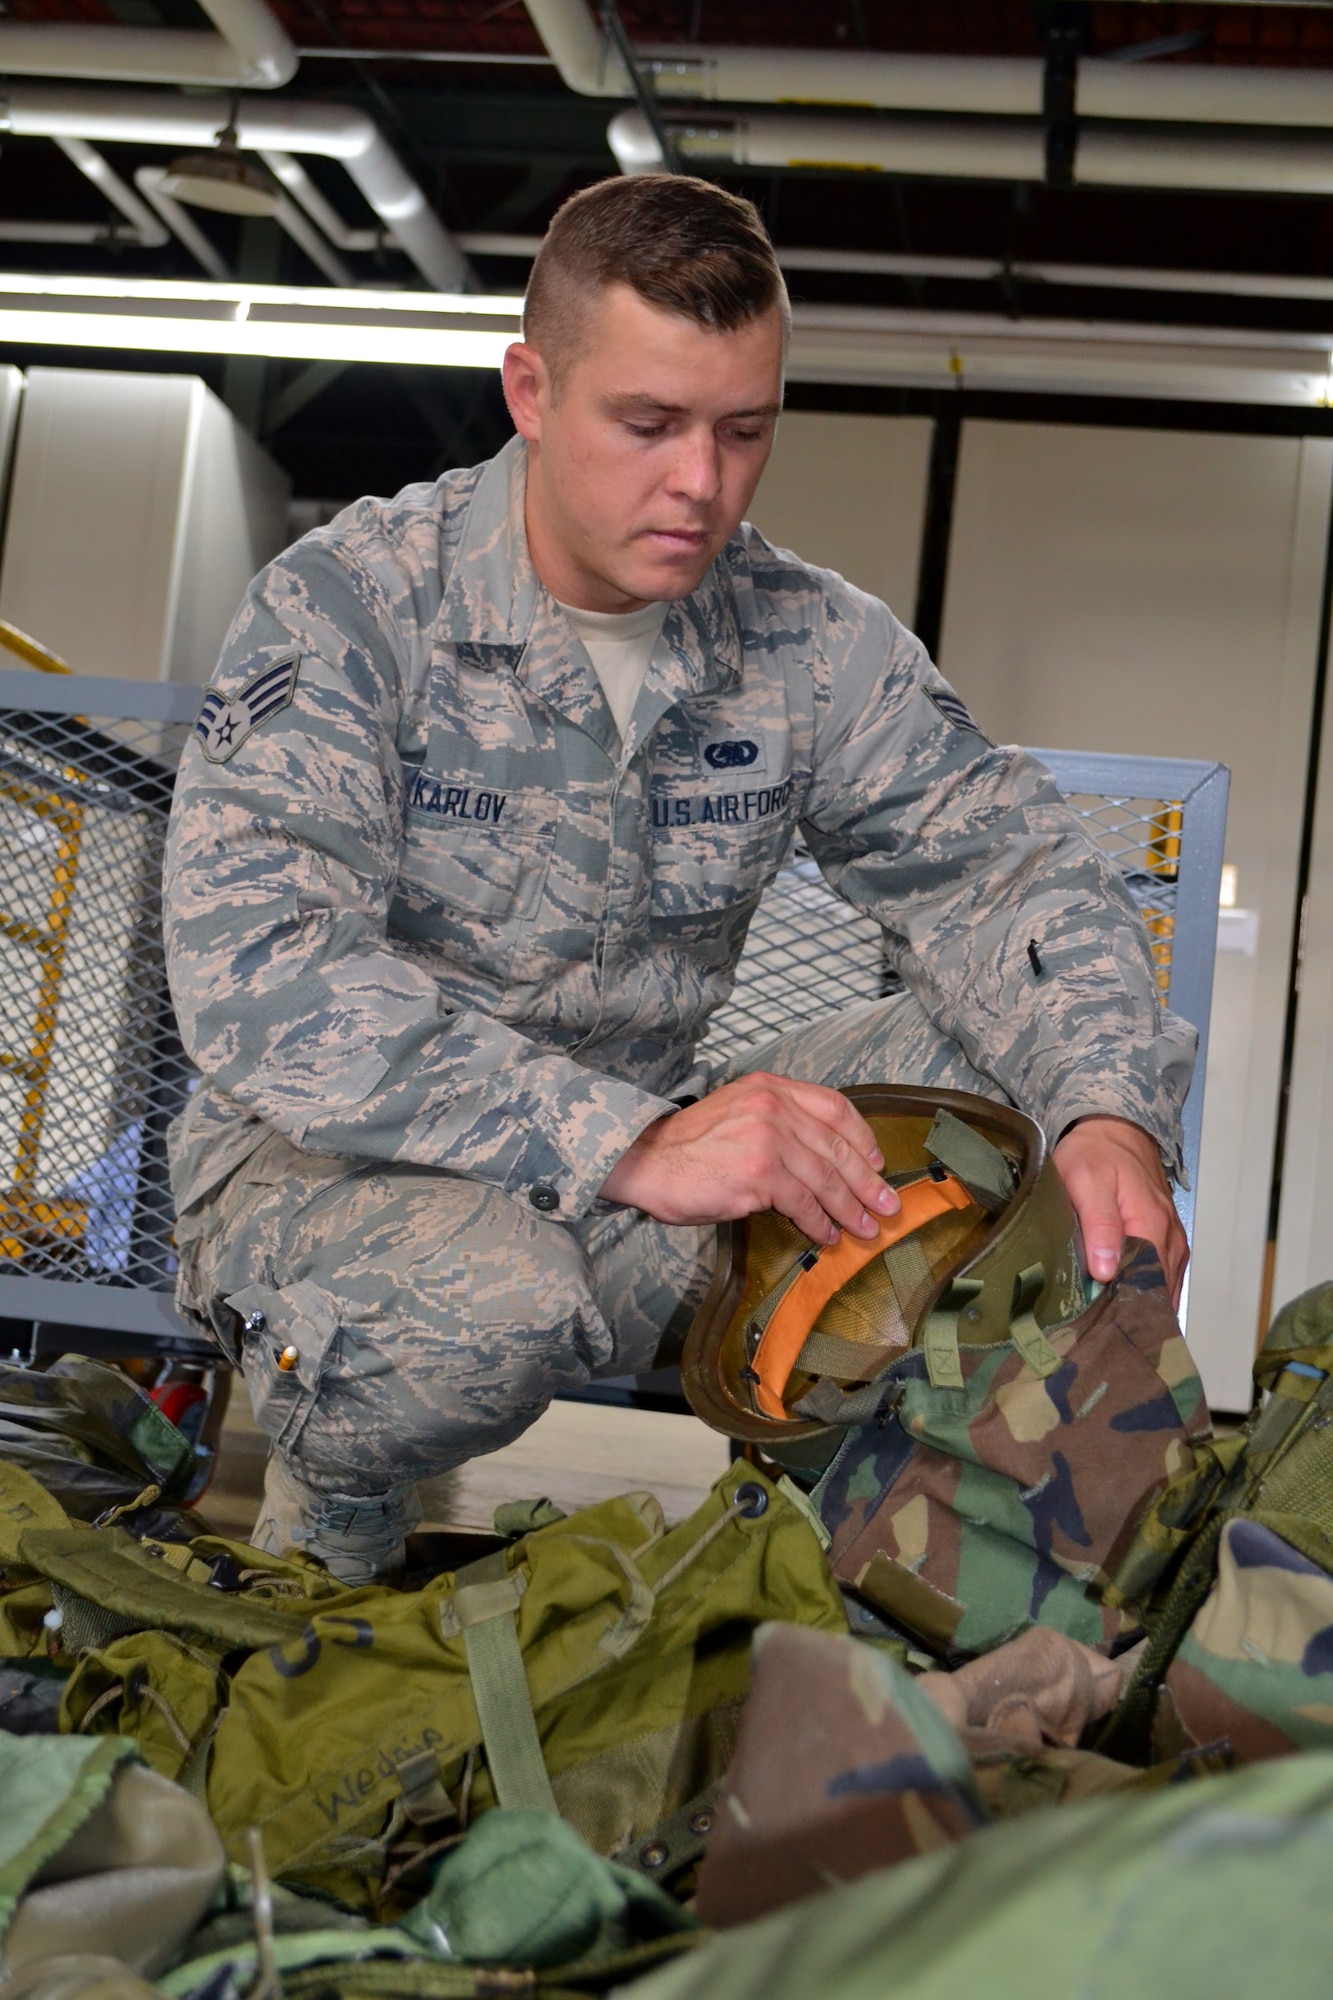 Senior Airman Igor Karlov, 111th Logistics Readiness Squadron supply technician, sorts through outdated military gear at Horsham Air Guard Station, Pa., Sept. 6, 2016. Karlov, part of the Pa. Air National Guard, was the first-ever Guardsman to receive The American Legion Spirit of Service Award in the 17 years it has been awarded to U.S. military members. (U.S. Air National Guard photo by Tech. Sgt. Andria Allmond)
